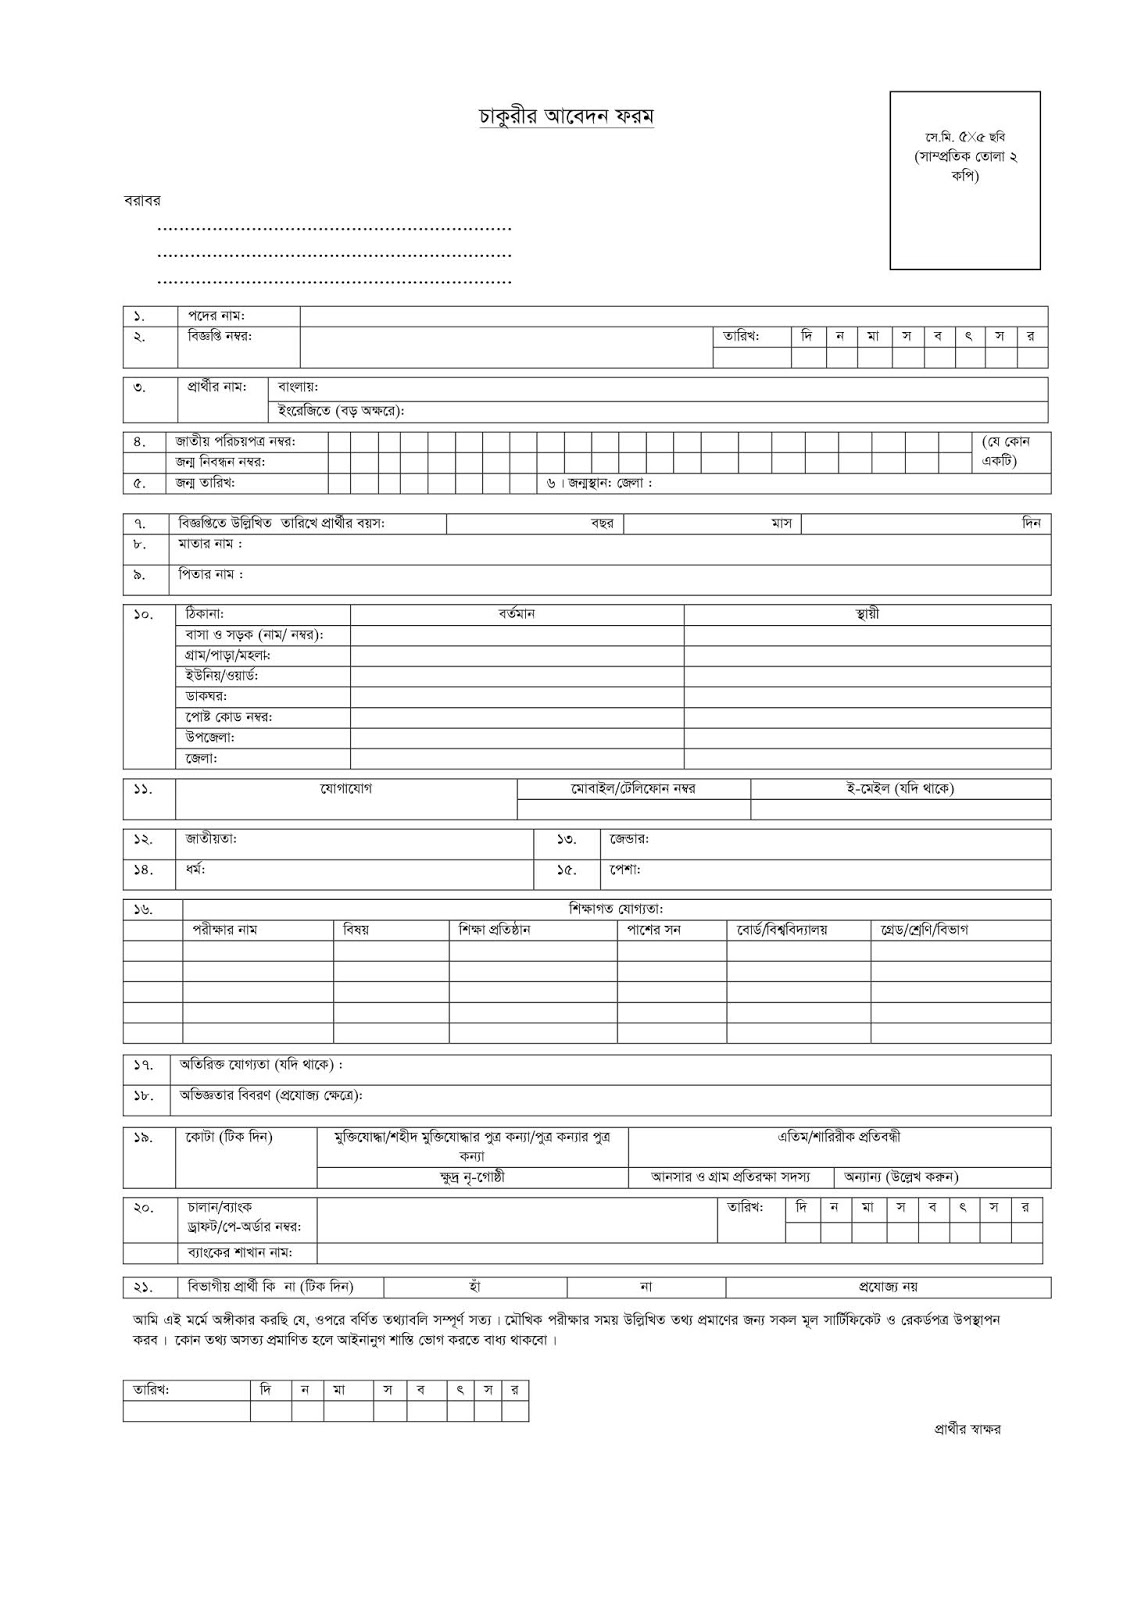 Office of the Chief Administrative Officer Job Application Form